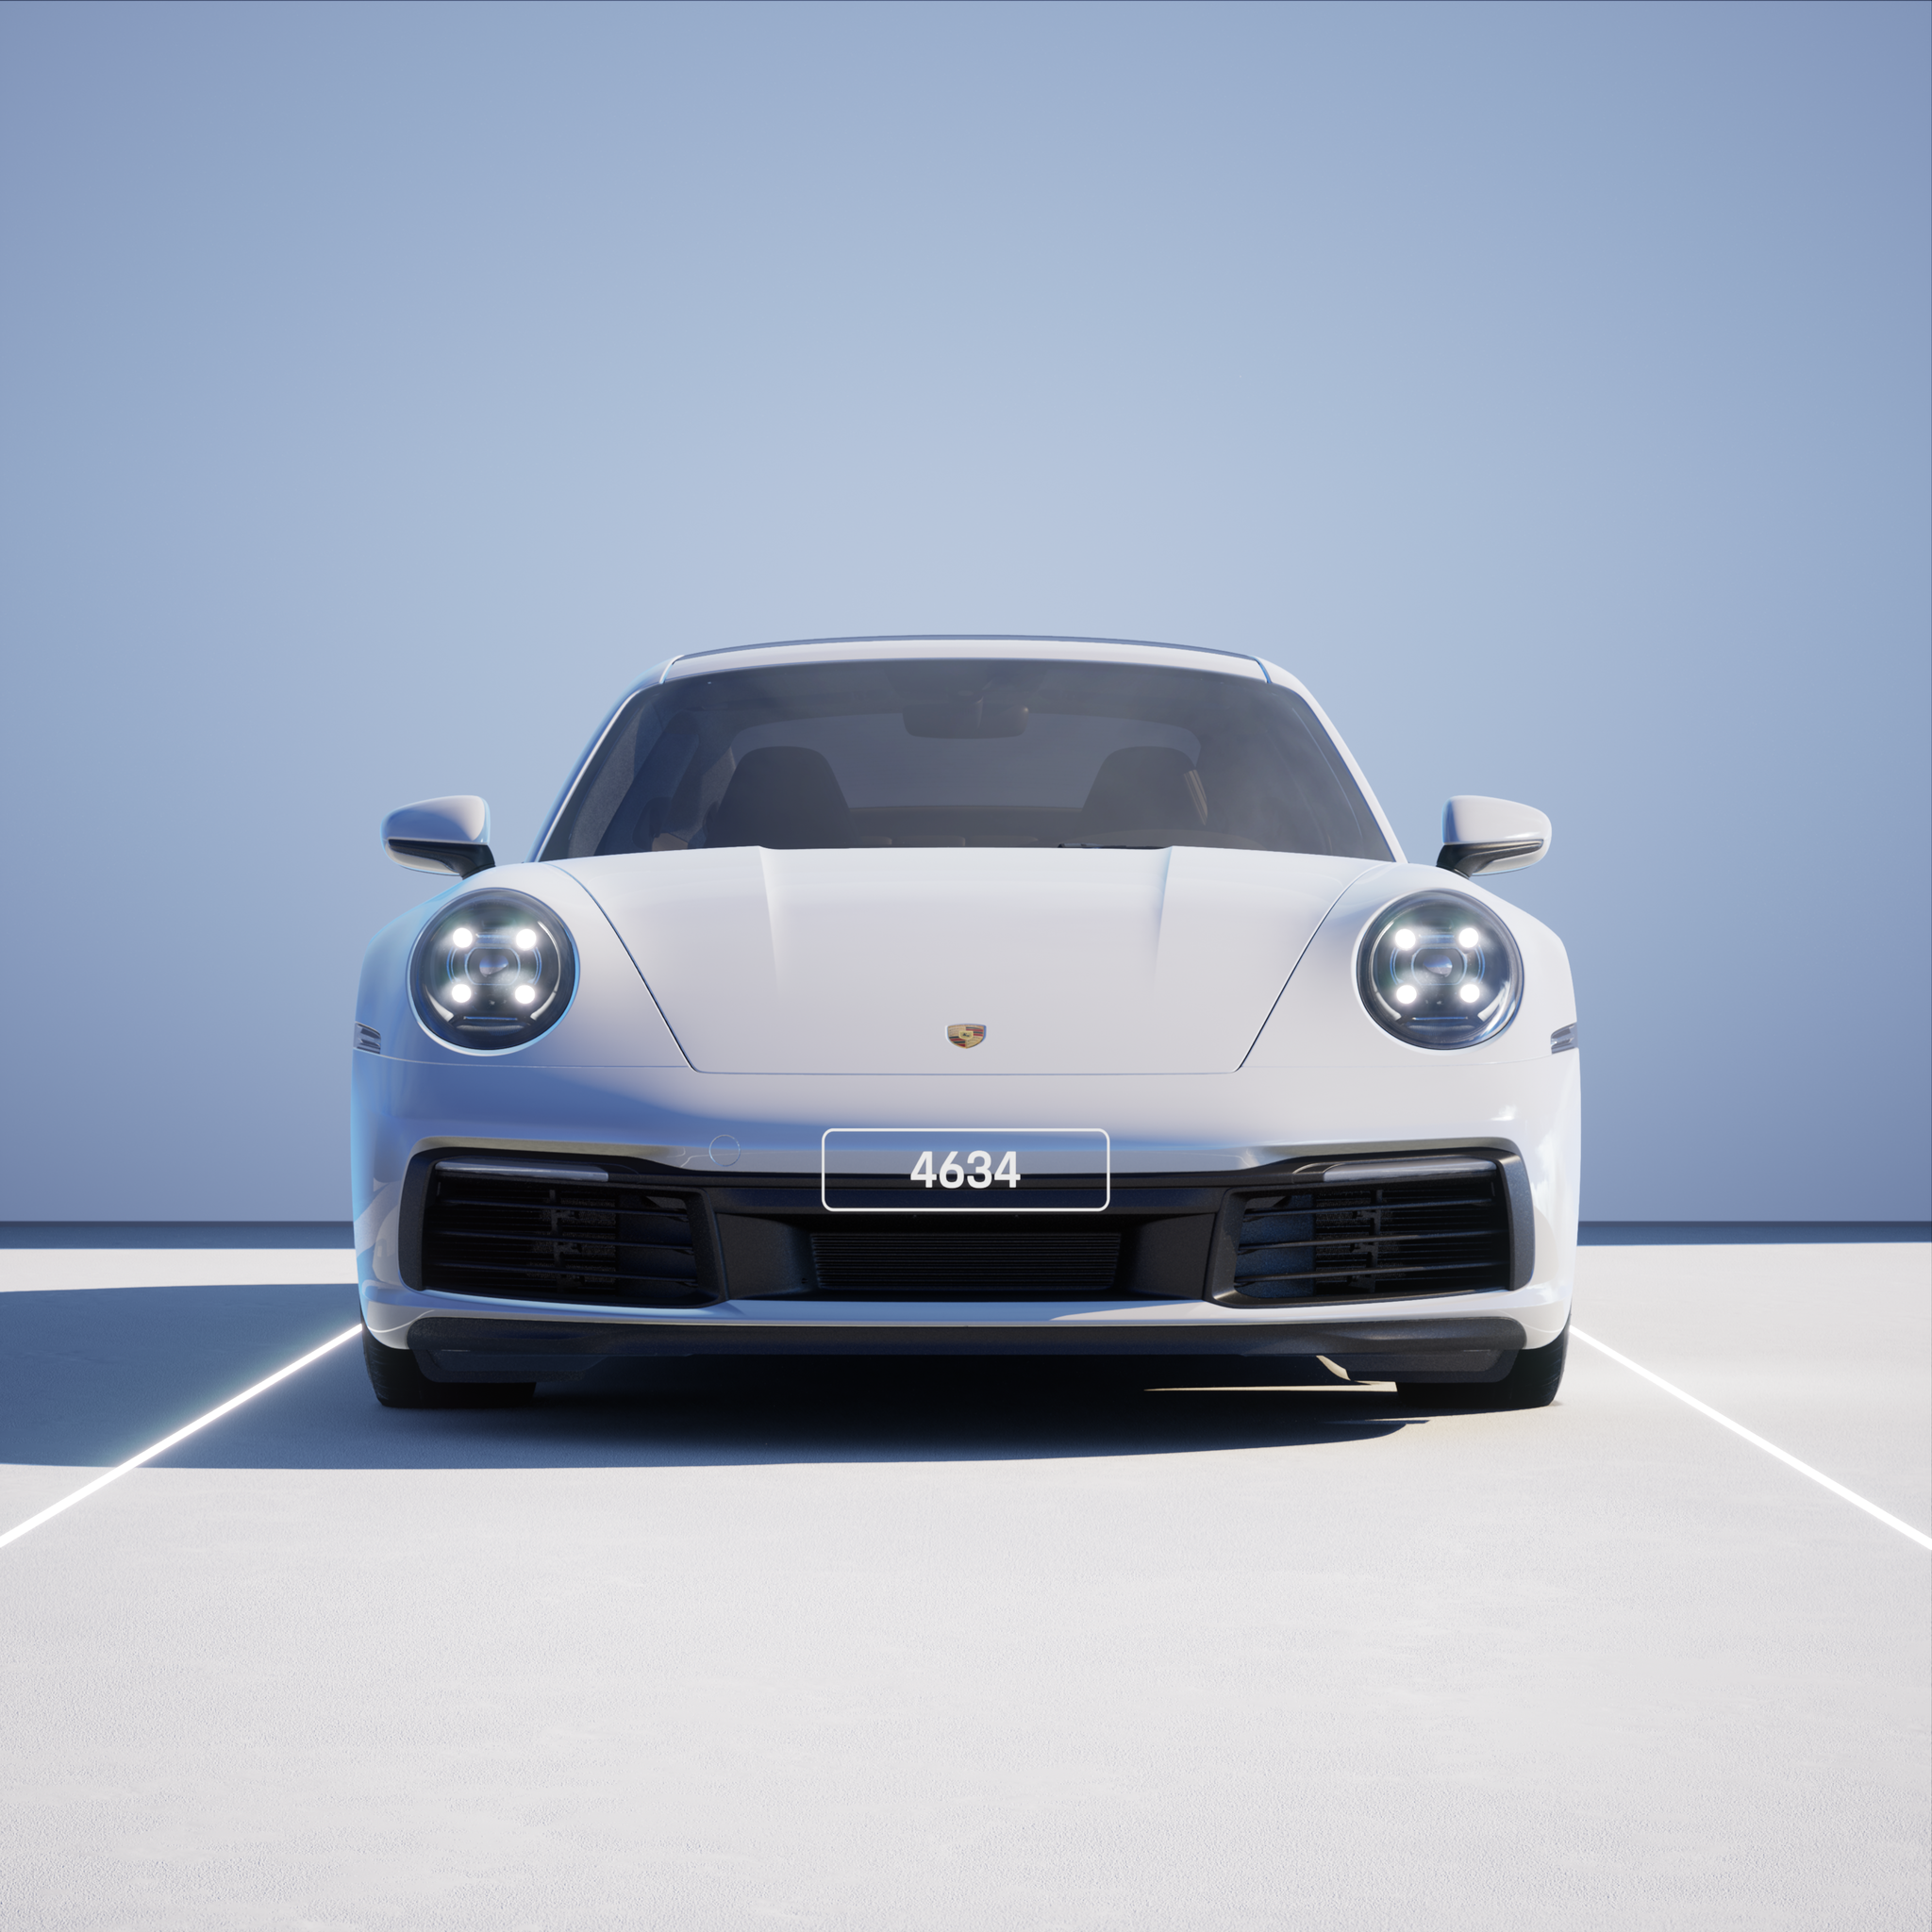 The PORSCHΞ 911 4634 image in phase